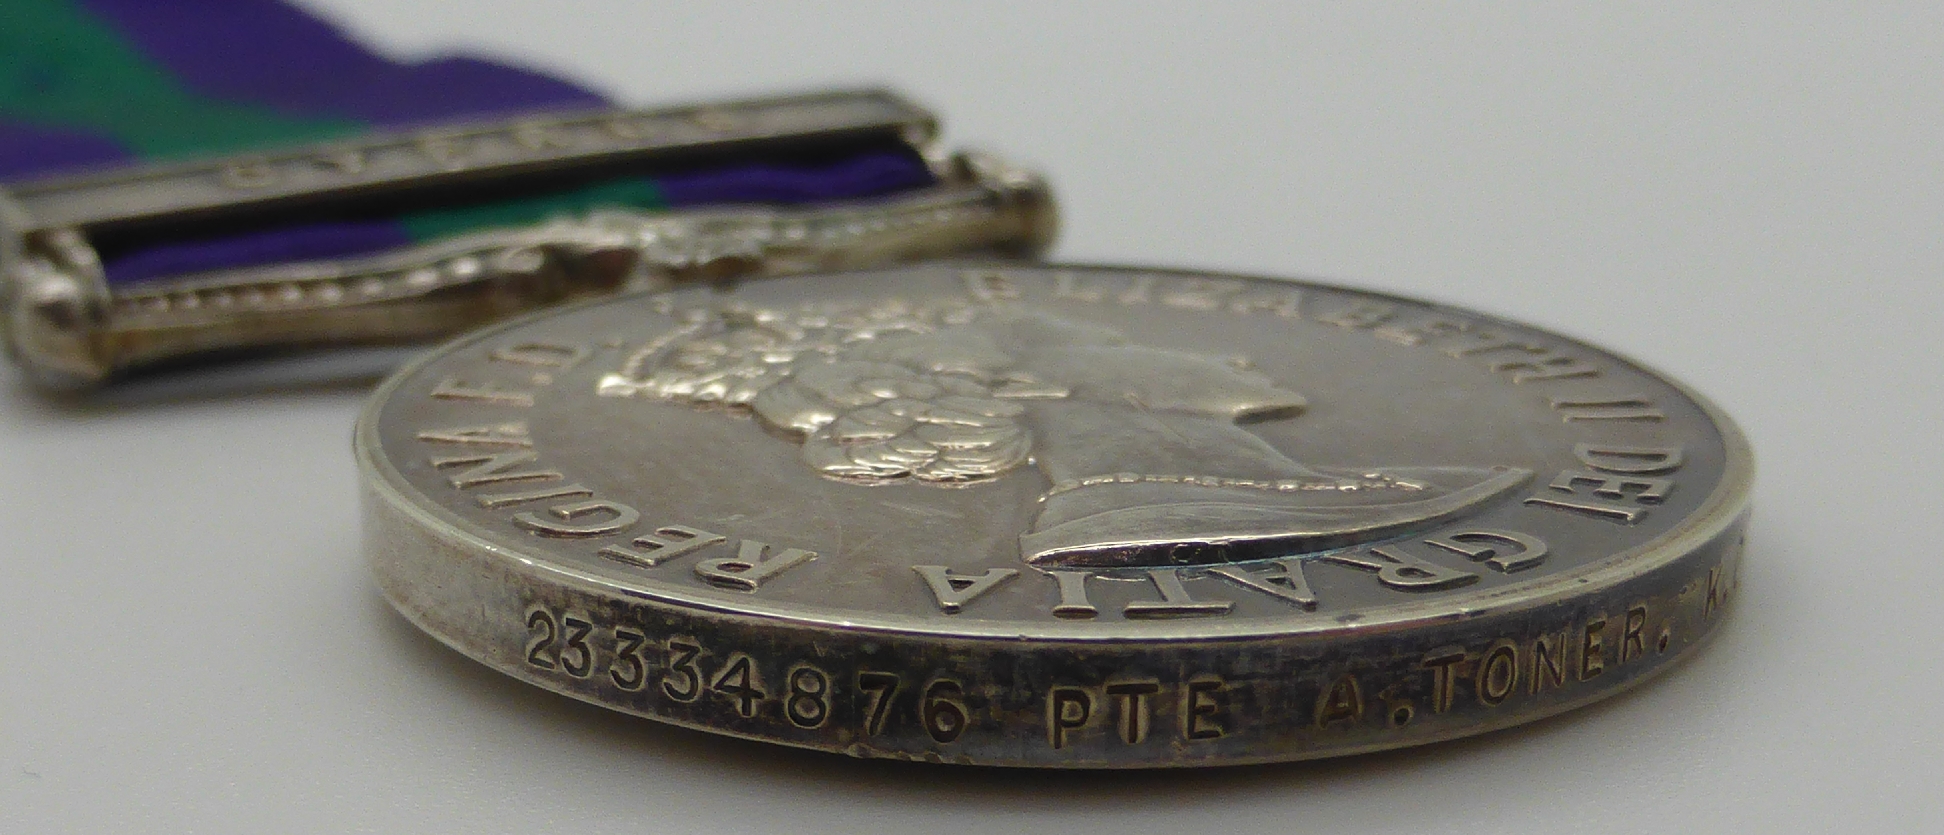 Elizabeth II British Army General Service Medal with Cyprus clasp named to 23114930 Pte E Lockwood - Image 6 of 6